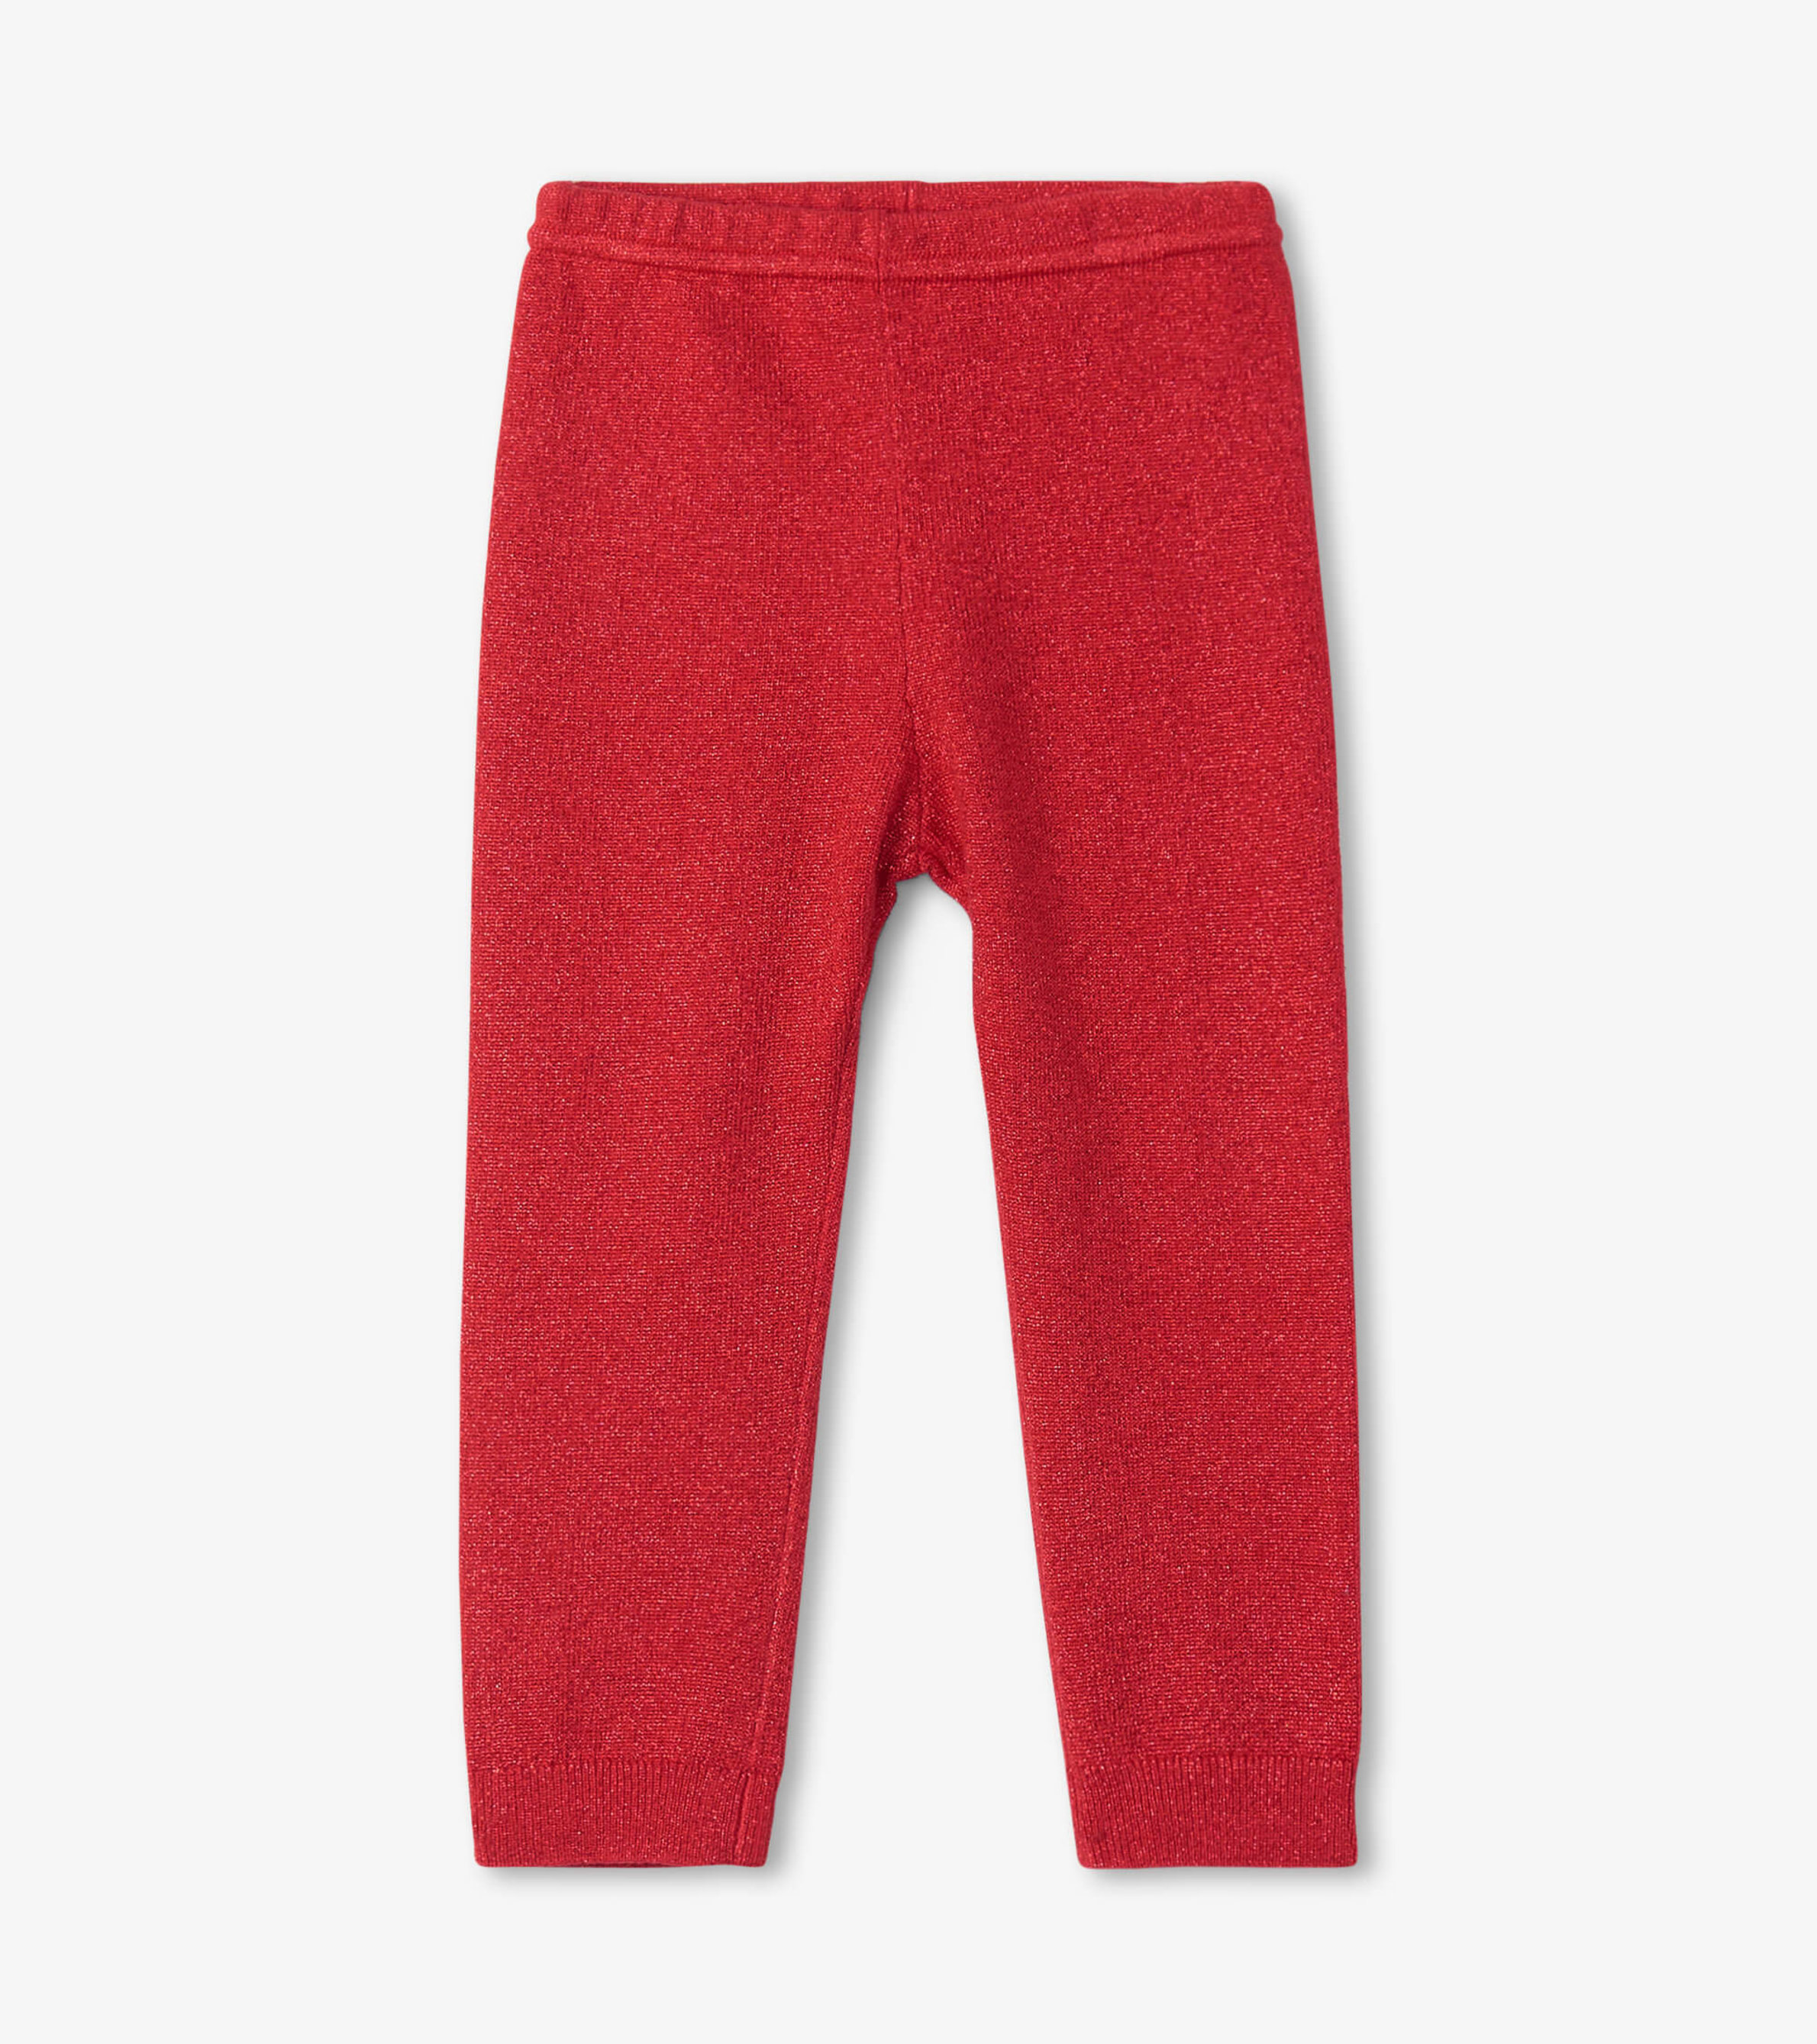 https://cdn.hatley.com/product_images/holiday-red-baby-cable-knit-leggings/F00CRI1393_jpg/pdp_zoom.jpg?c=1695154336&locale=us_en